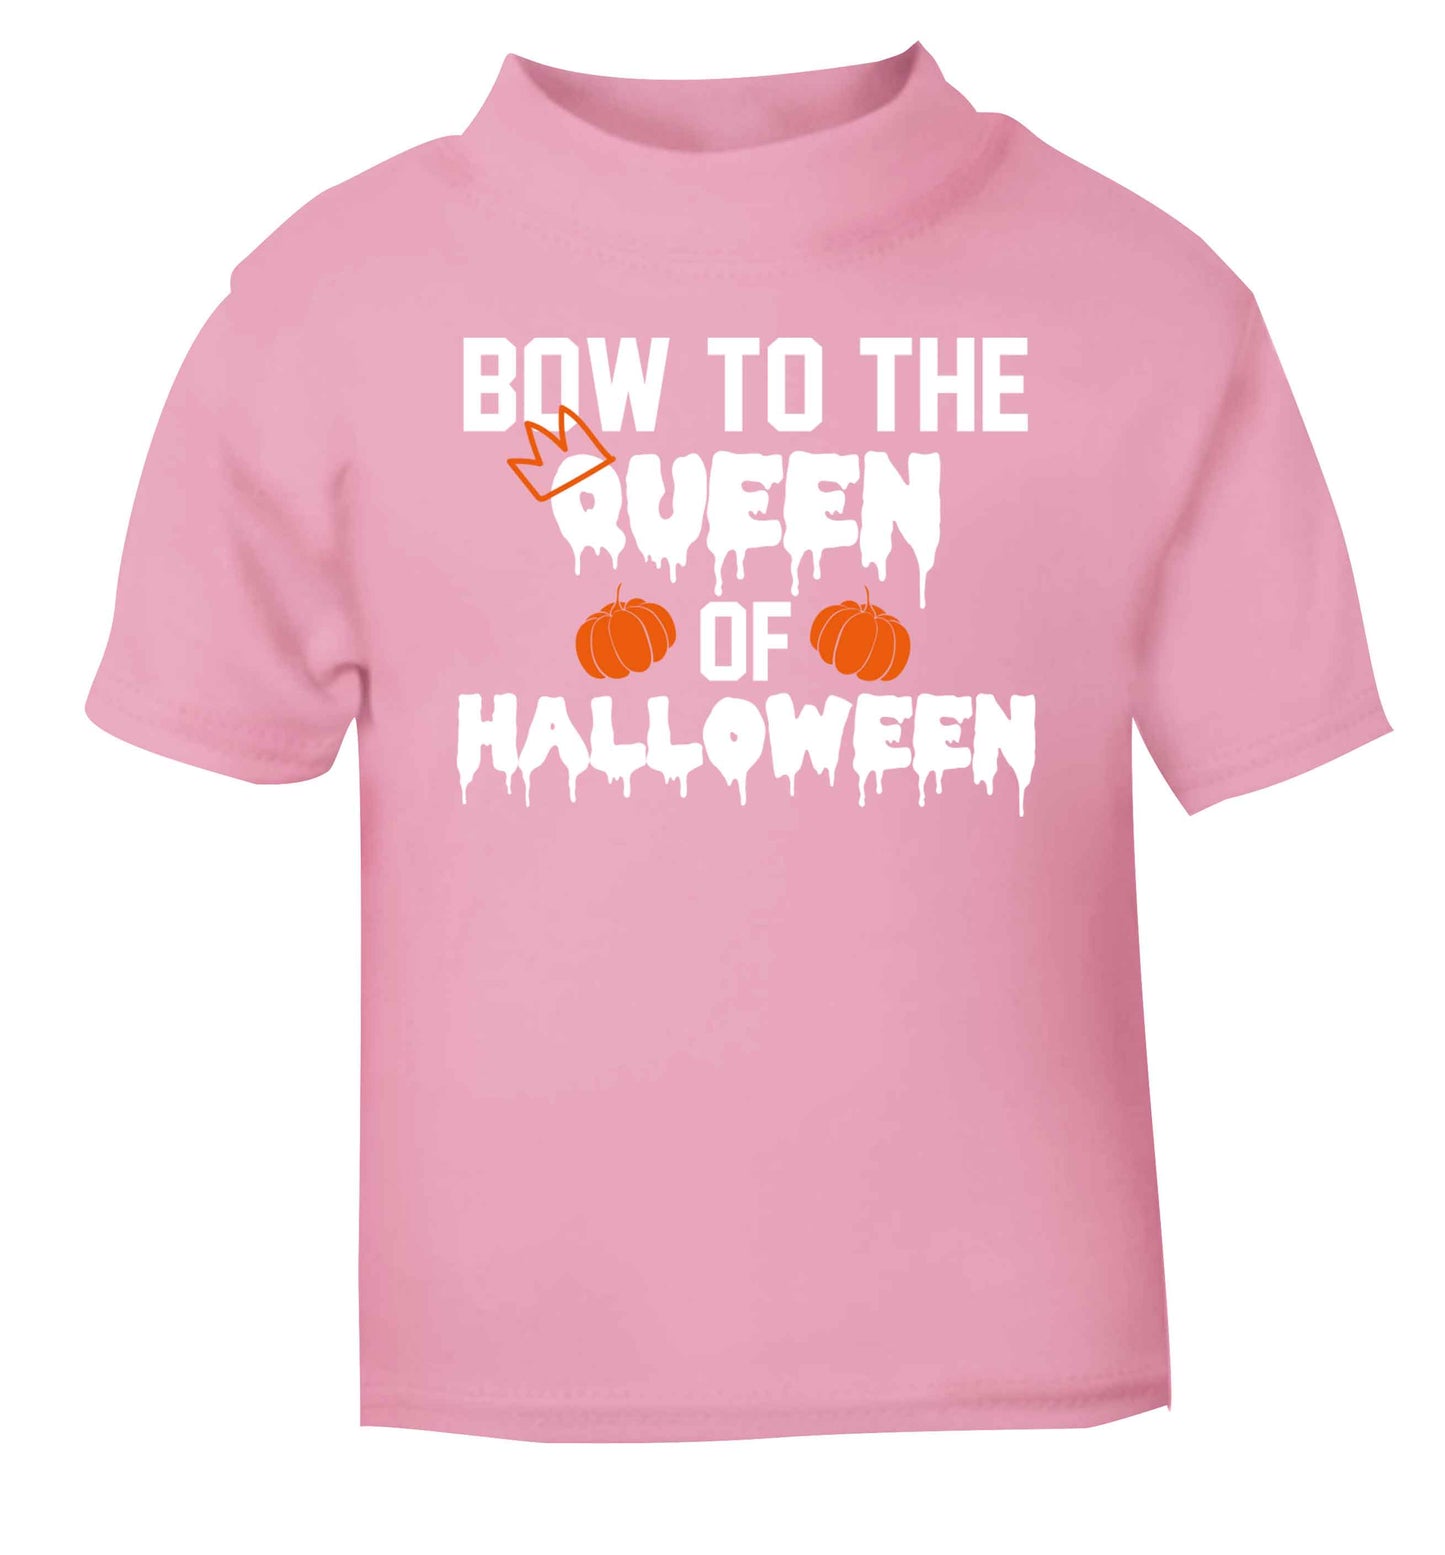 Bow to the Queen of halloween light pink baby toddler Tshirt 2 Years